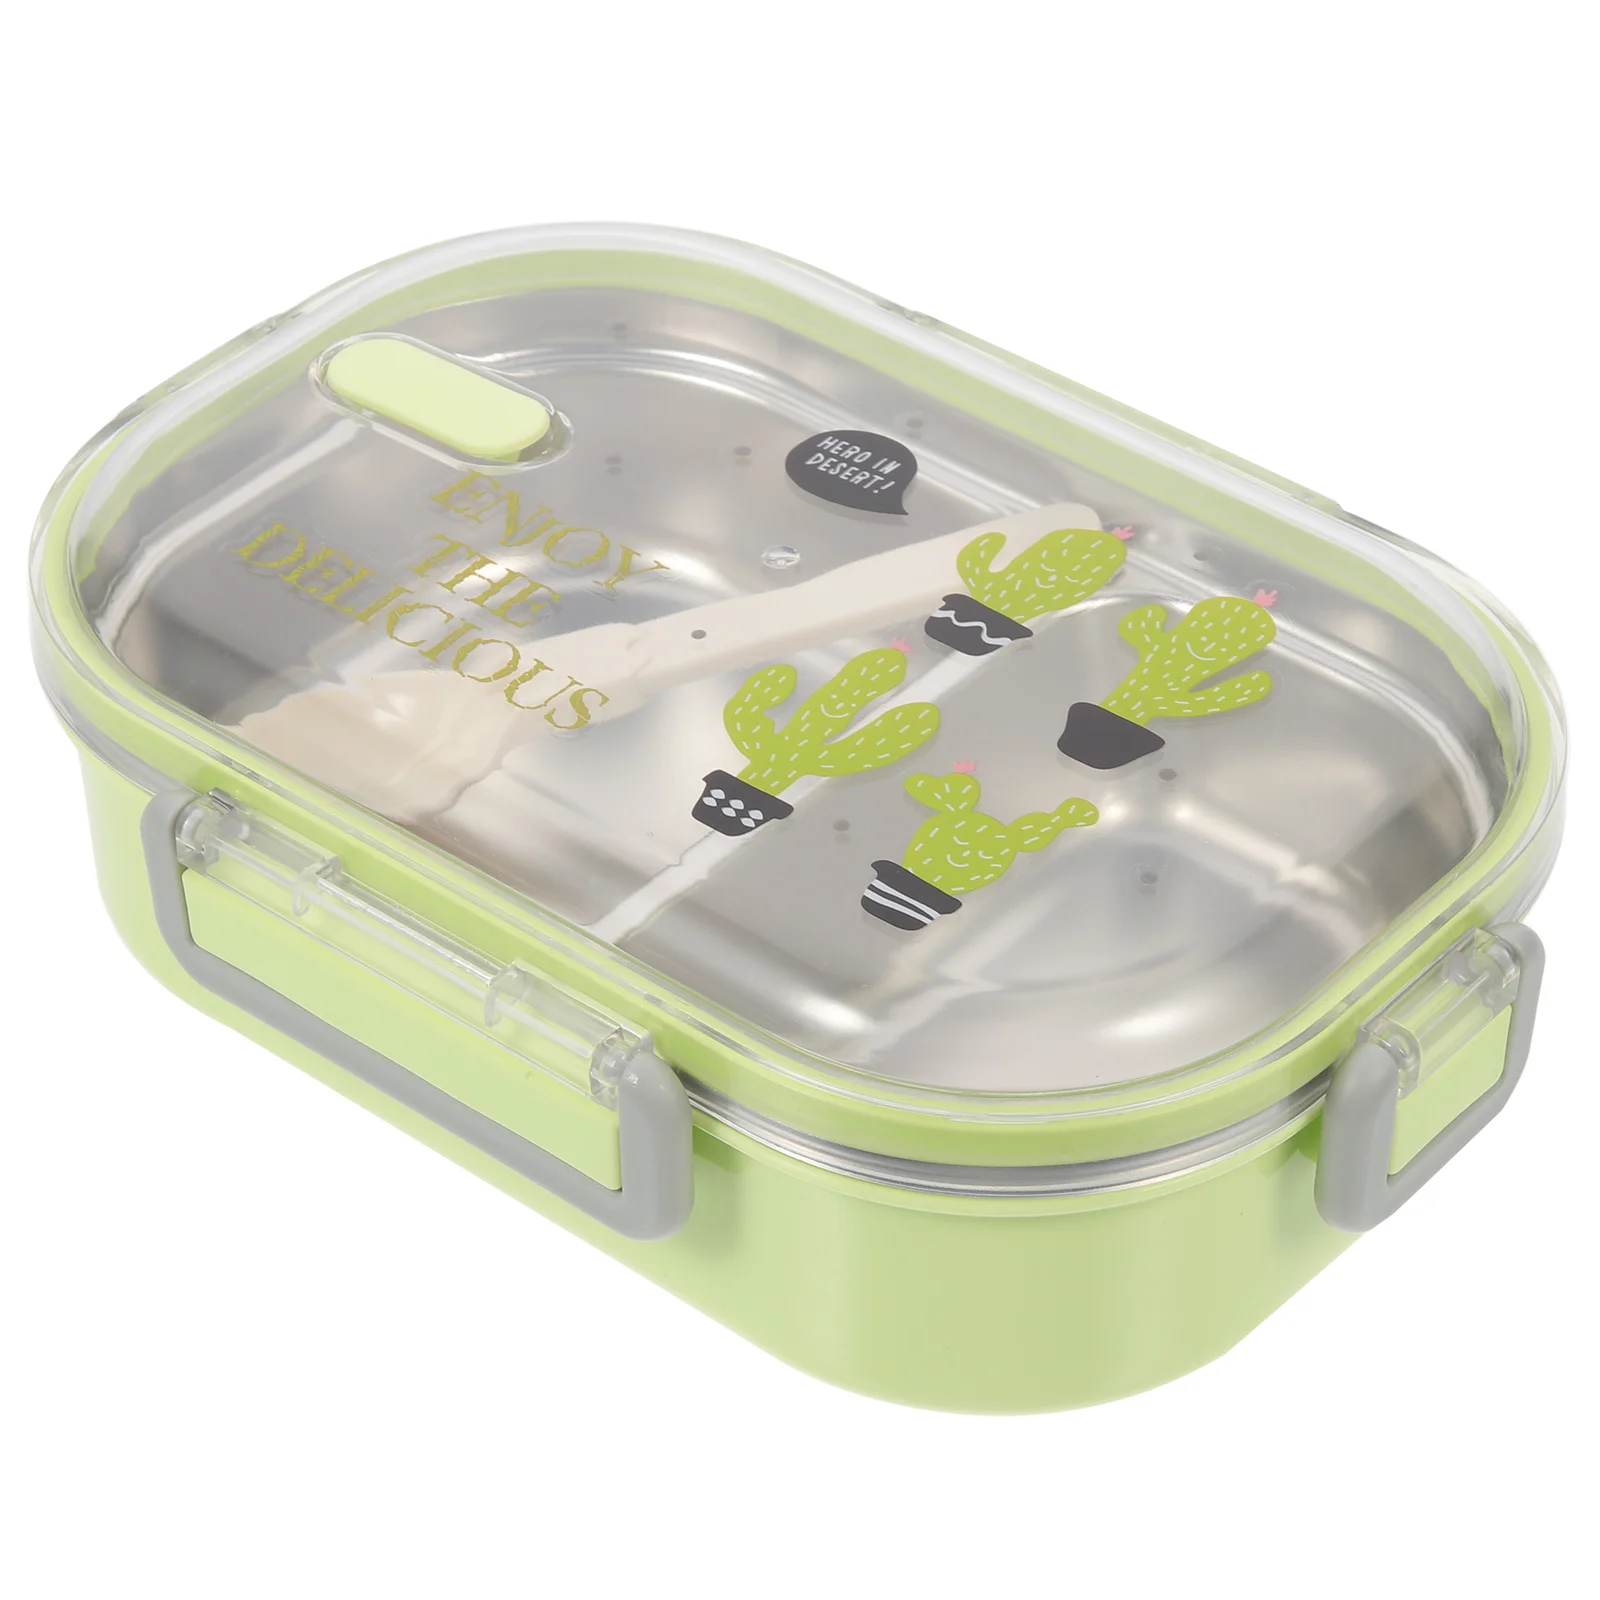 

Box Lunch Stainless Steel Bento Kids Containers Portable Adults Compartment Compartments Japanese Adult Microwave Leakproof